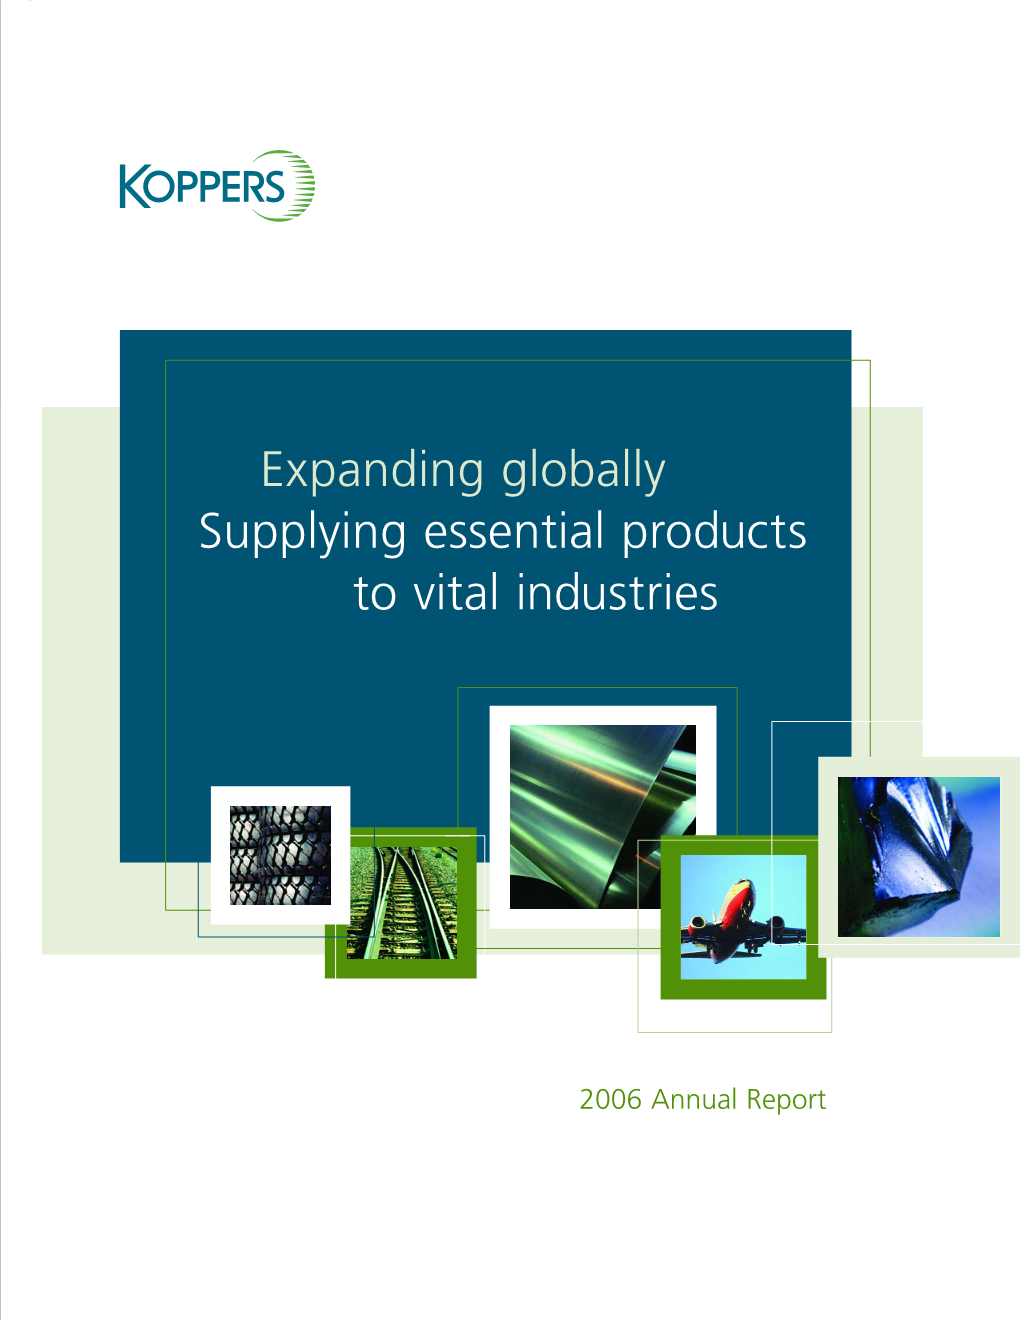 Koppers 2006 Annual Report